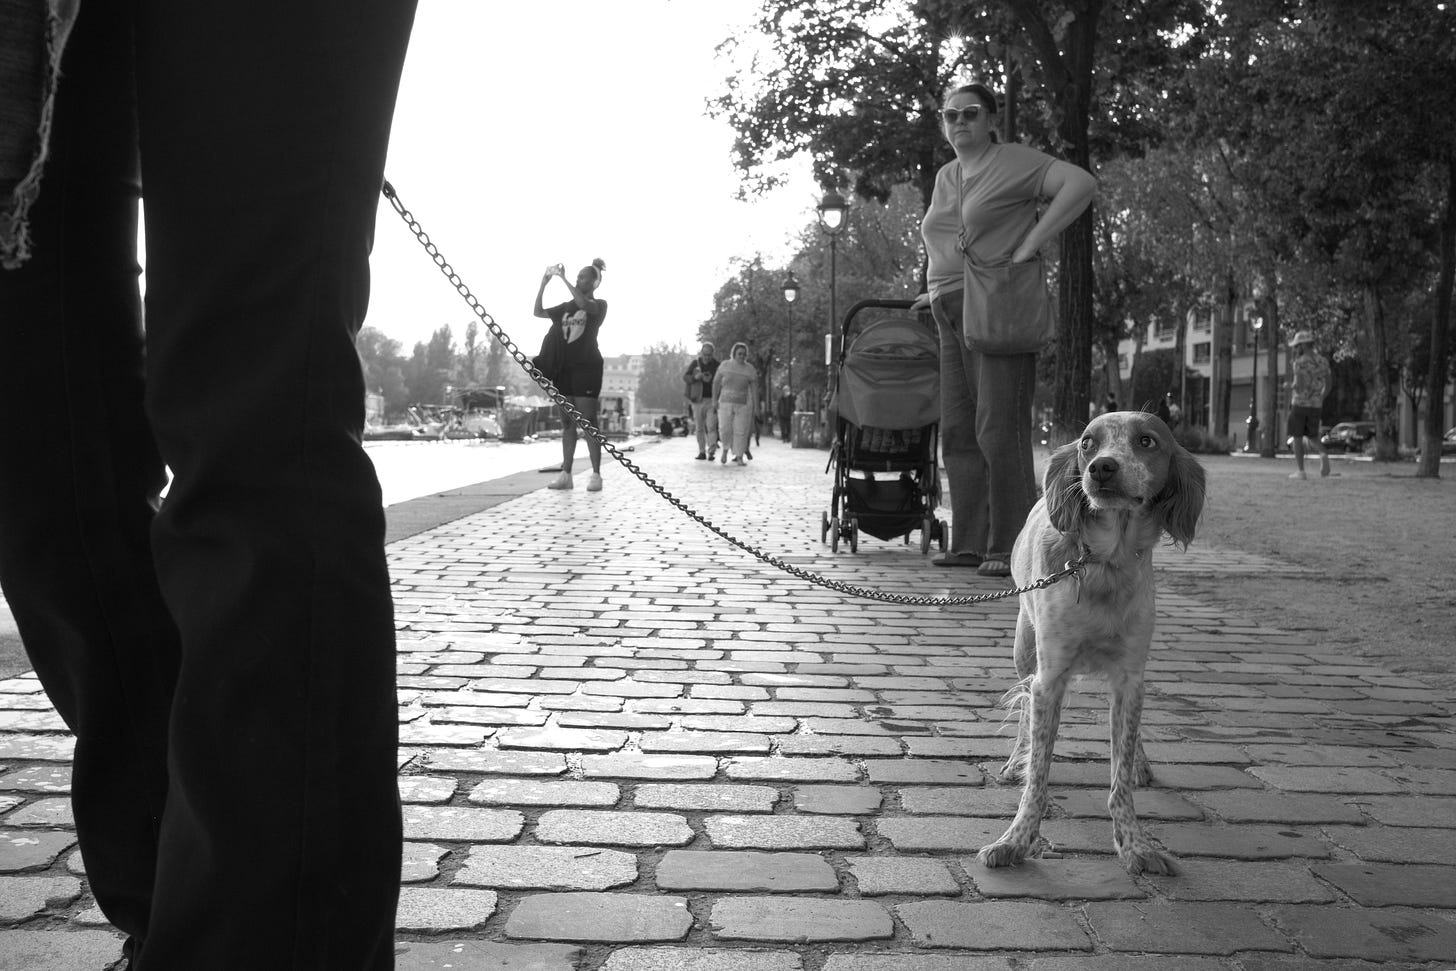 A suspicious dog looks at its master on the side of a canal in Paris. In the background, a woman watches on, and behind her, a woman takes a snapshot of something.